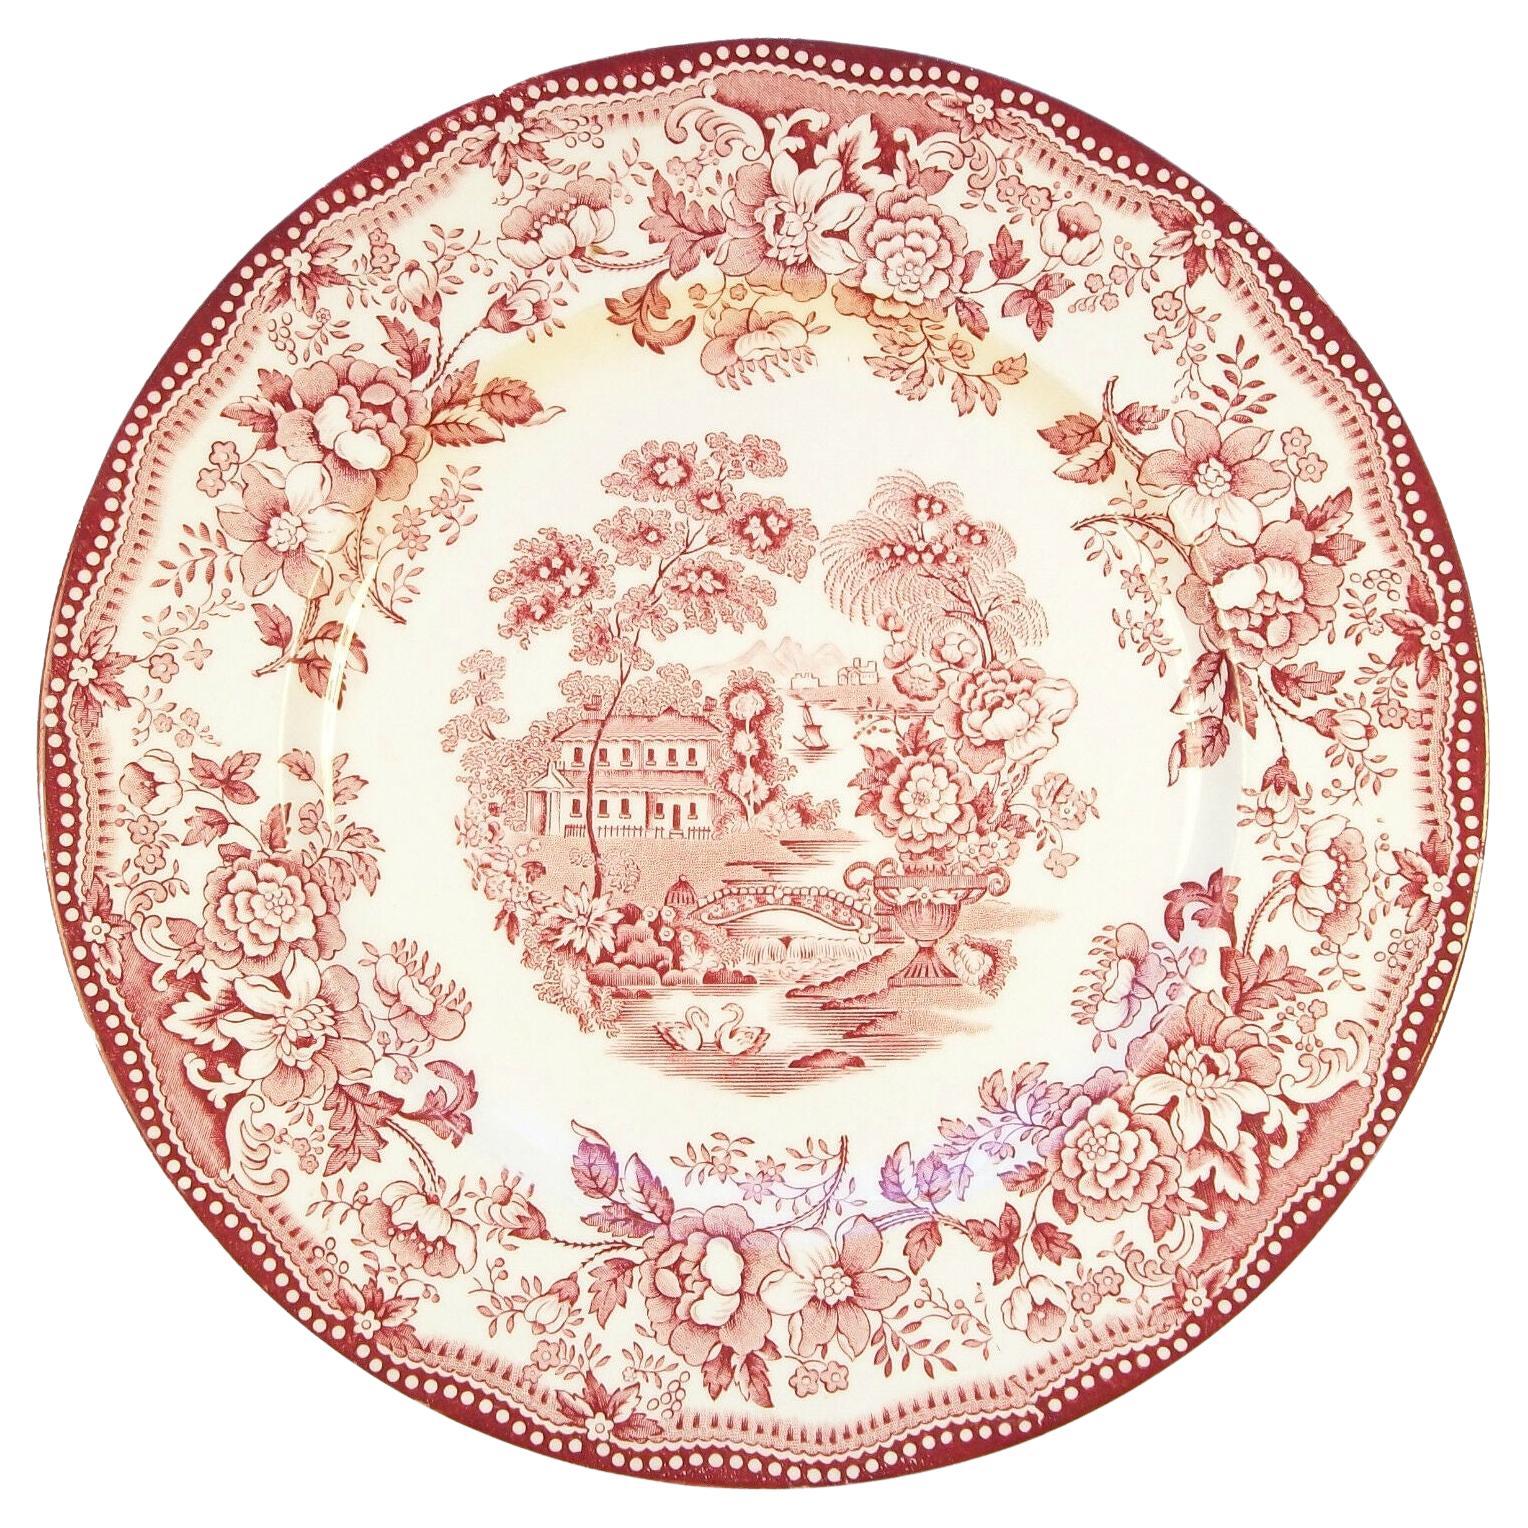 ROYAL STAFFORDSHIRE - Clarice Cliff - 'Tonquin' - Dinner Plate - Early 20th C.